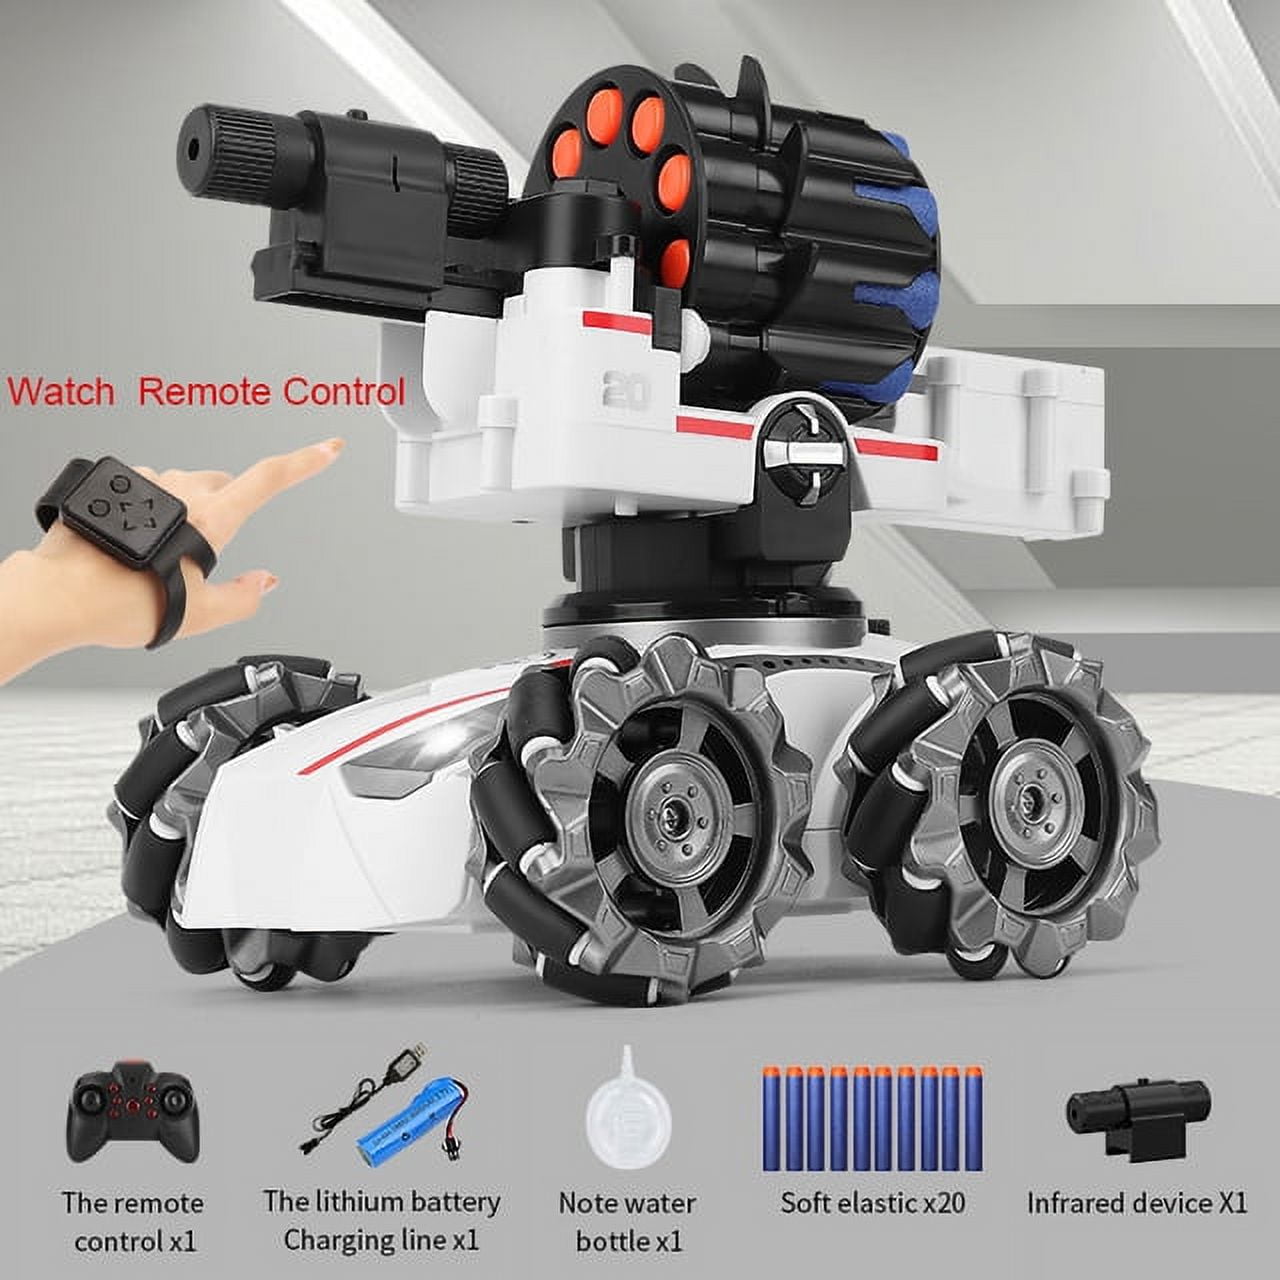 2.4G RC Car Toy 4WD Water Bomb Tank RC Toy Shooting Competitive Gesture  Controlled Tank Remote Control Drift Car Kids Boy Toys